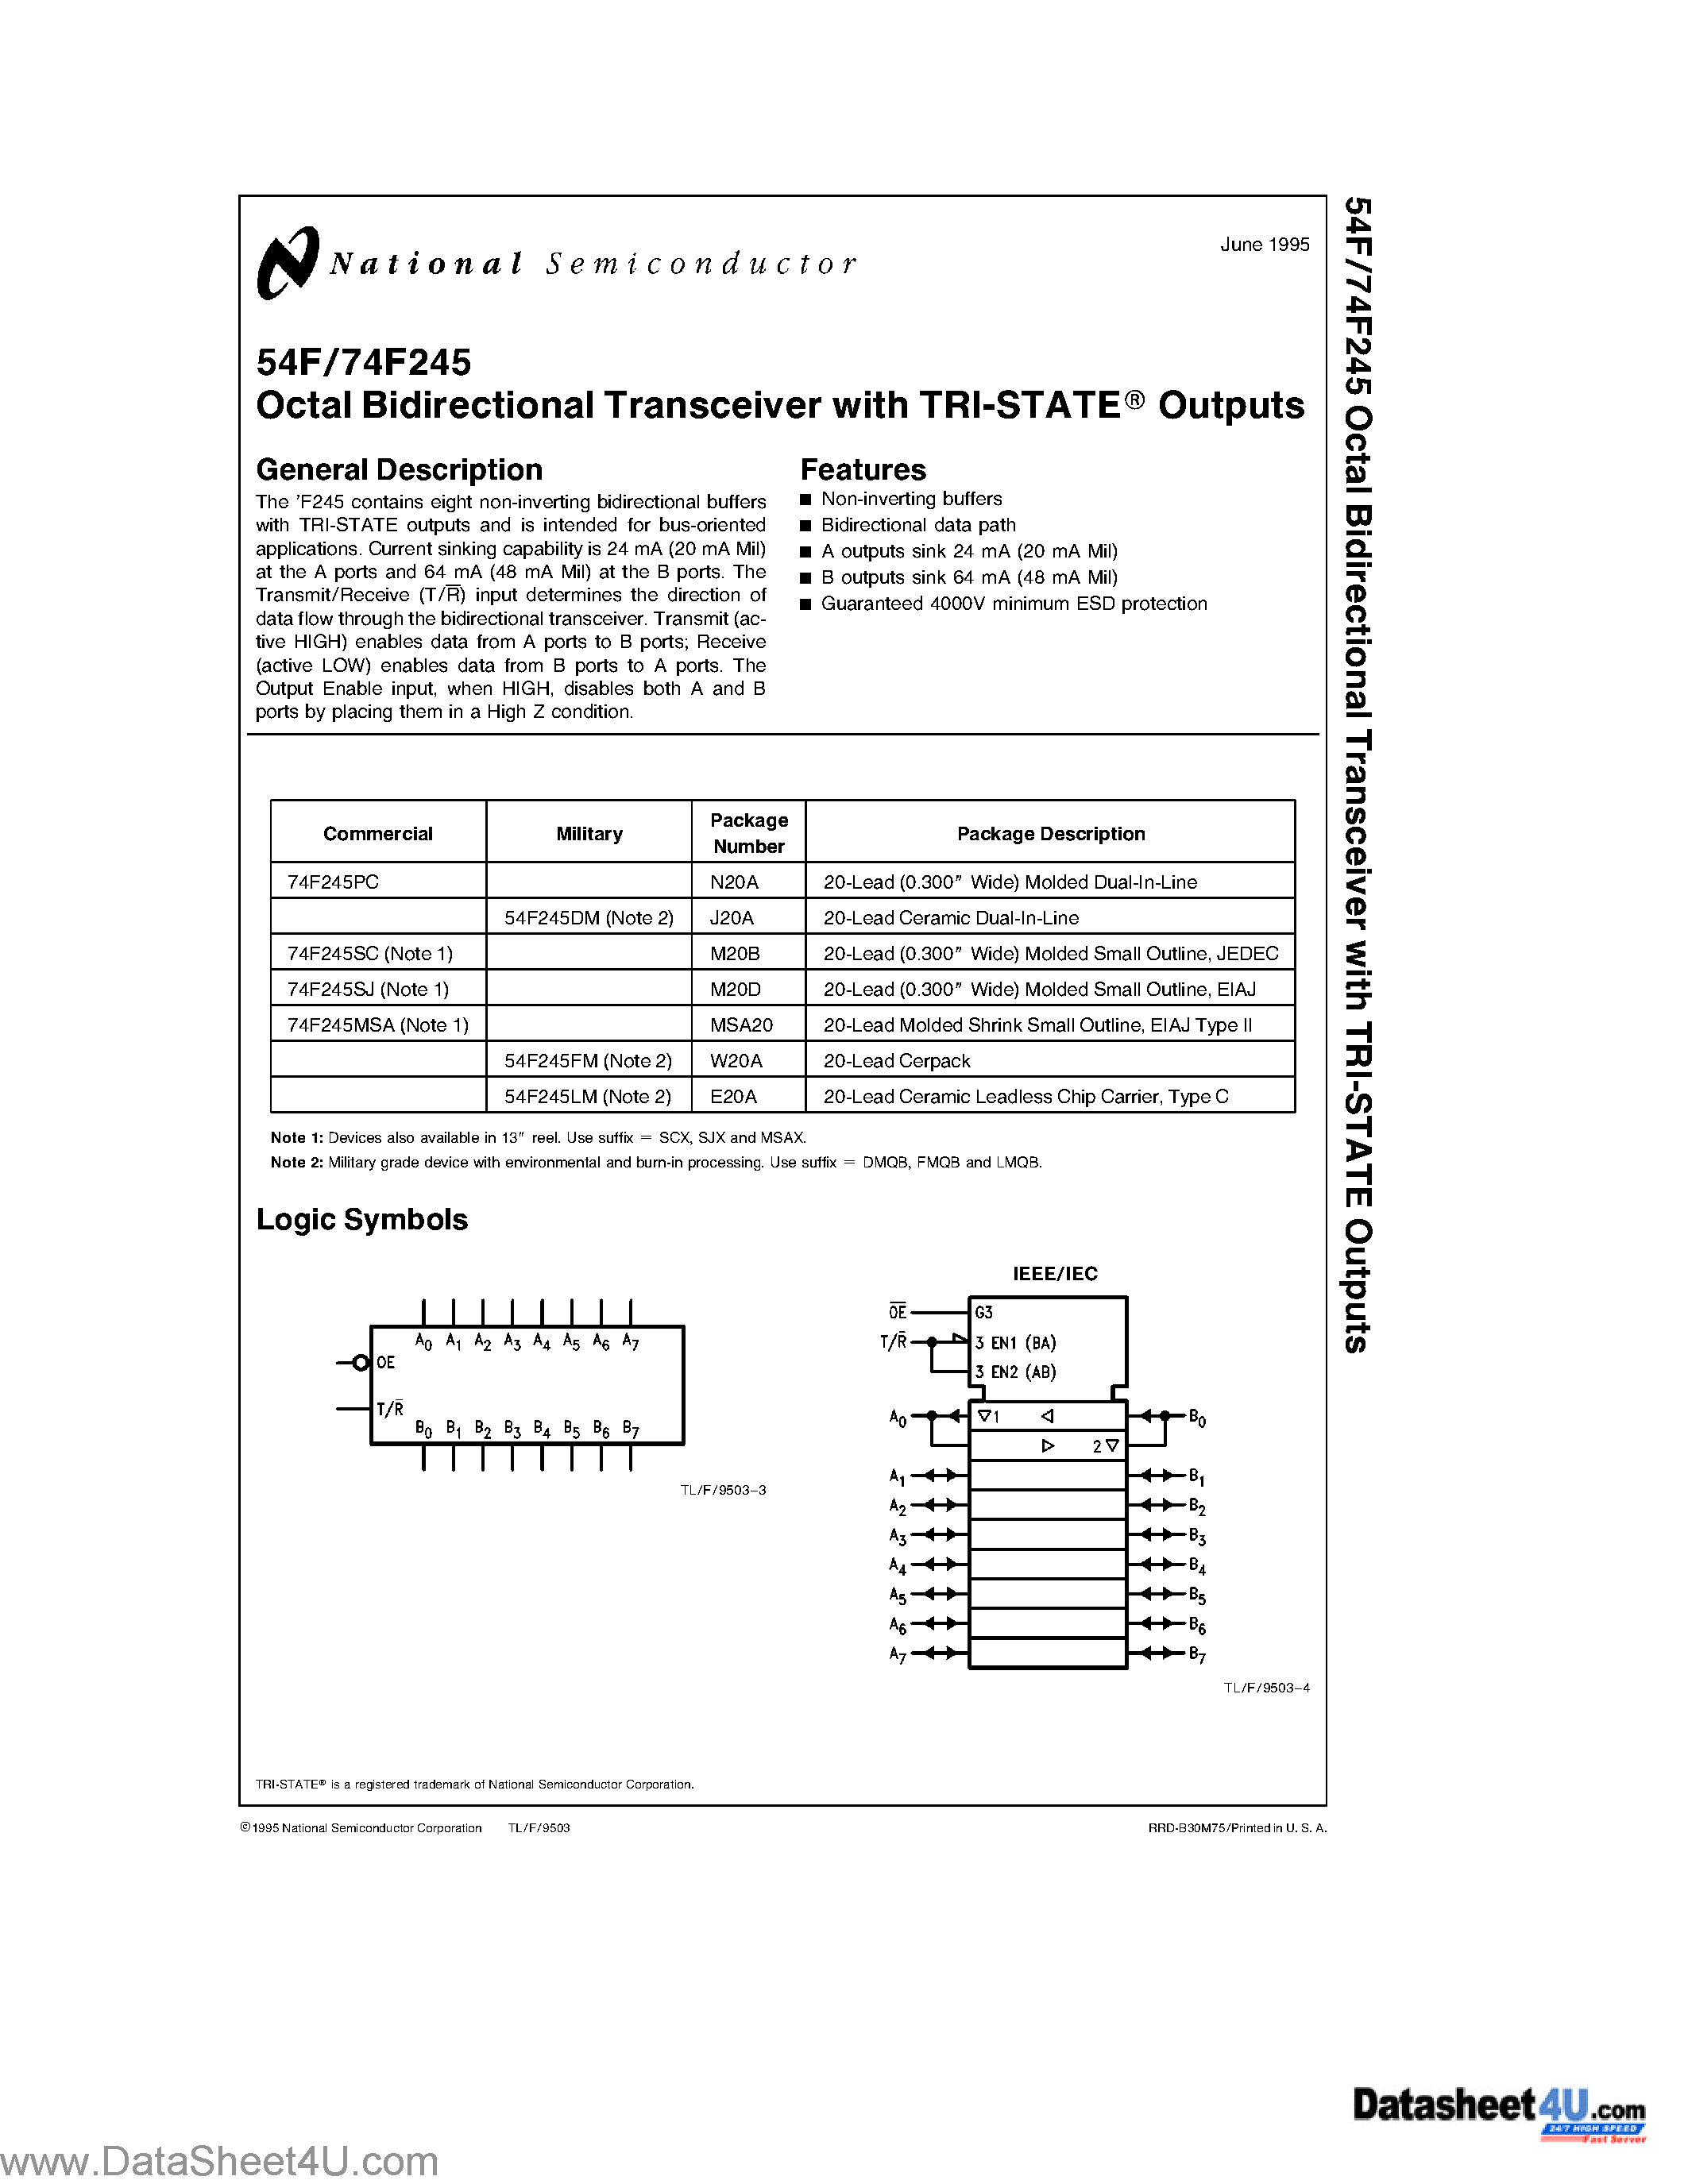 Даташит 54F245 - Octal Bidirectional Transceiver with TRI-STATE Outputs страница 1